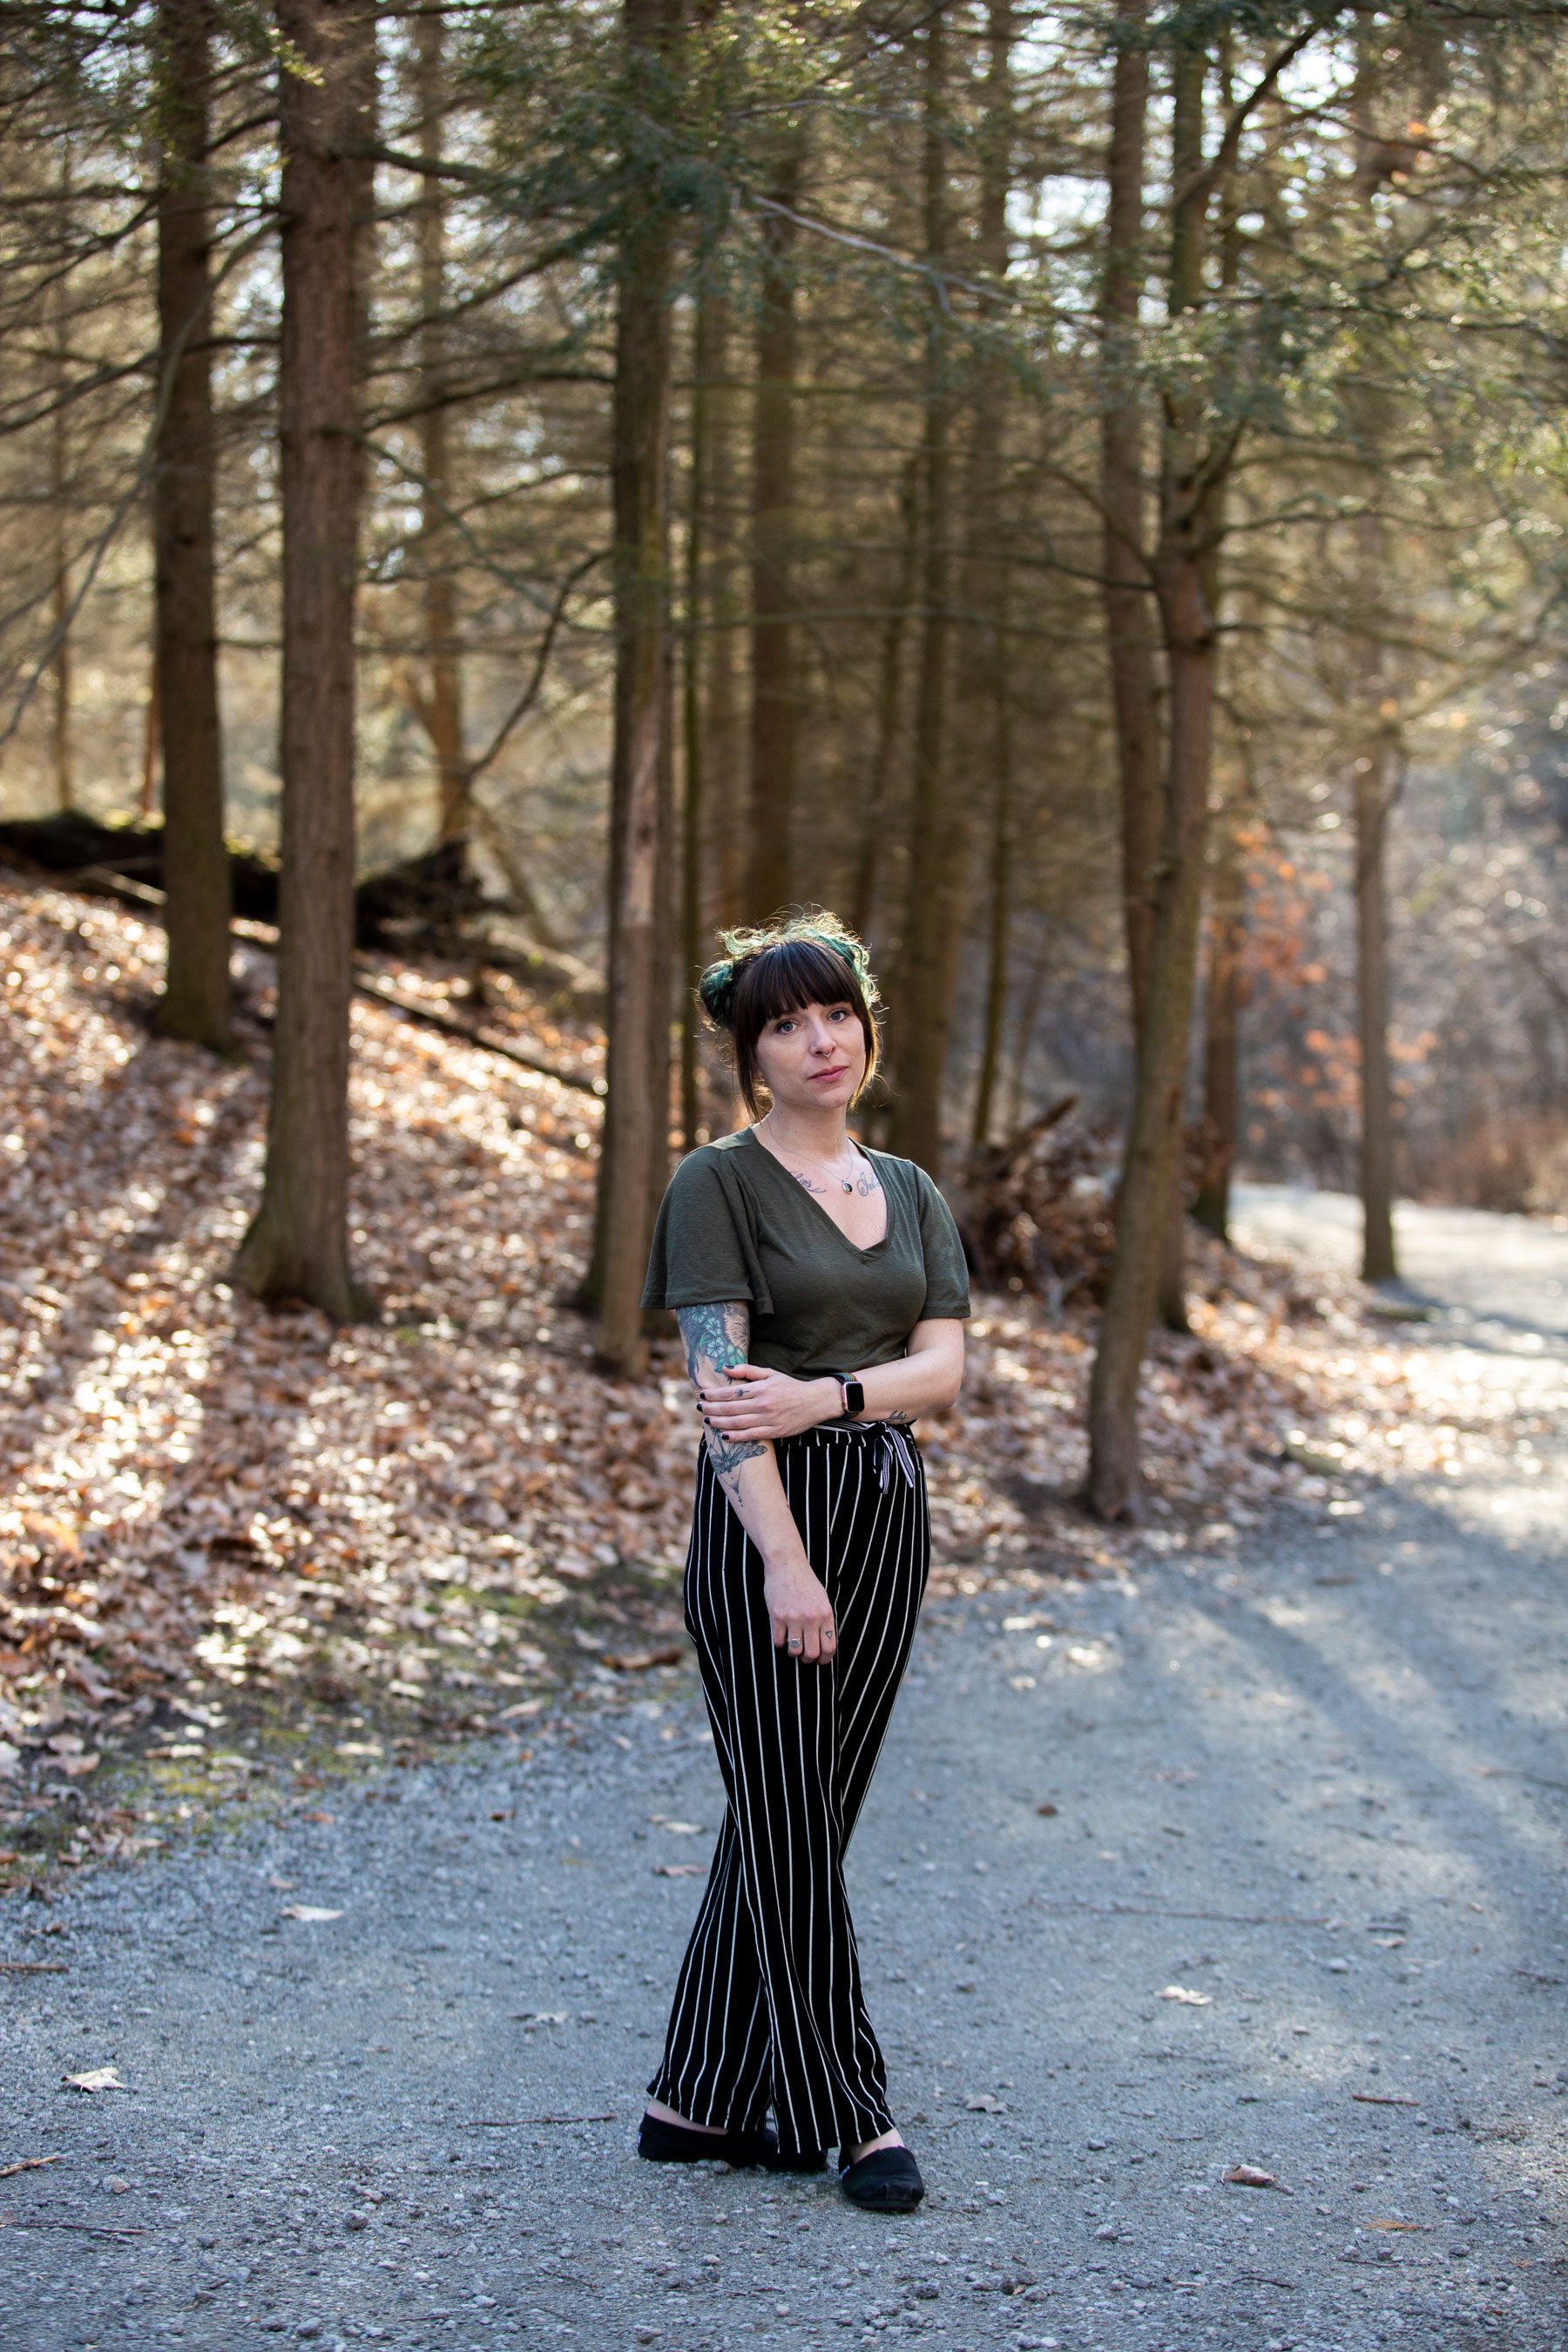 A wide shote of a woman standing outside in the woods and looking at the camera.